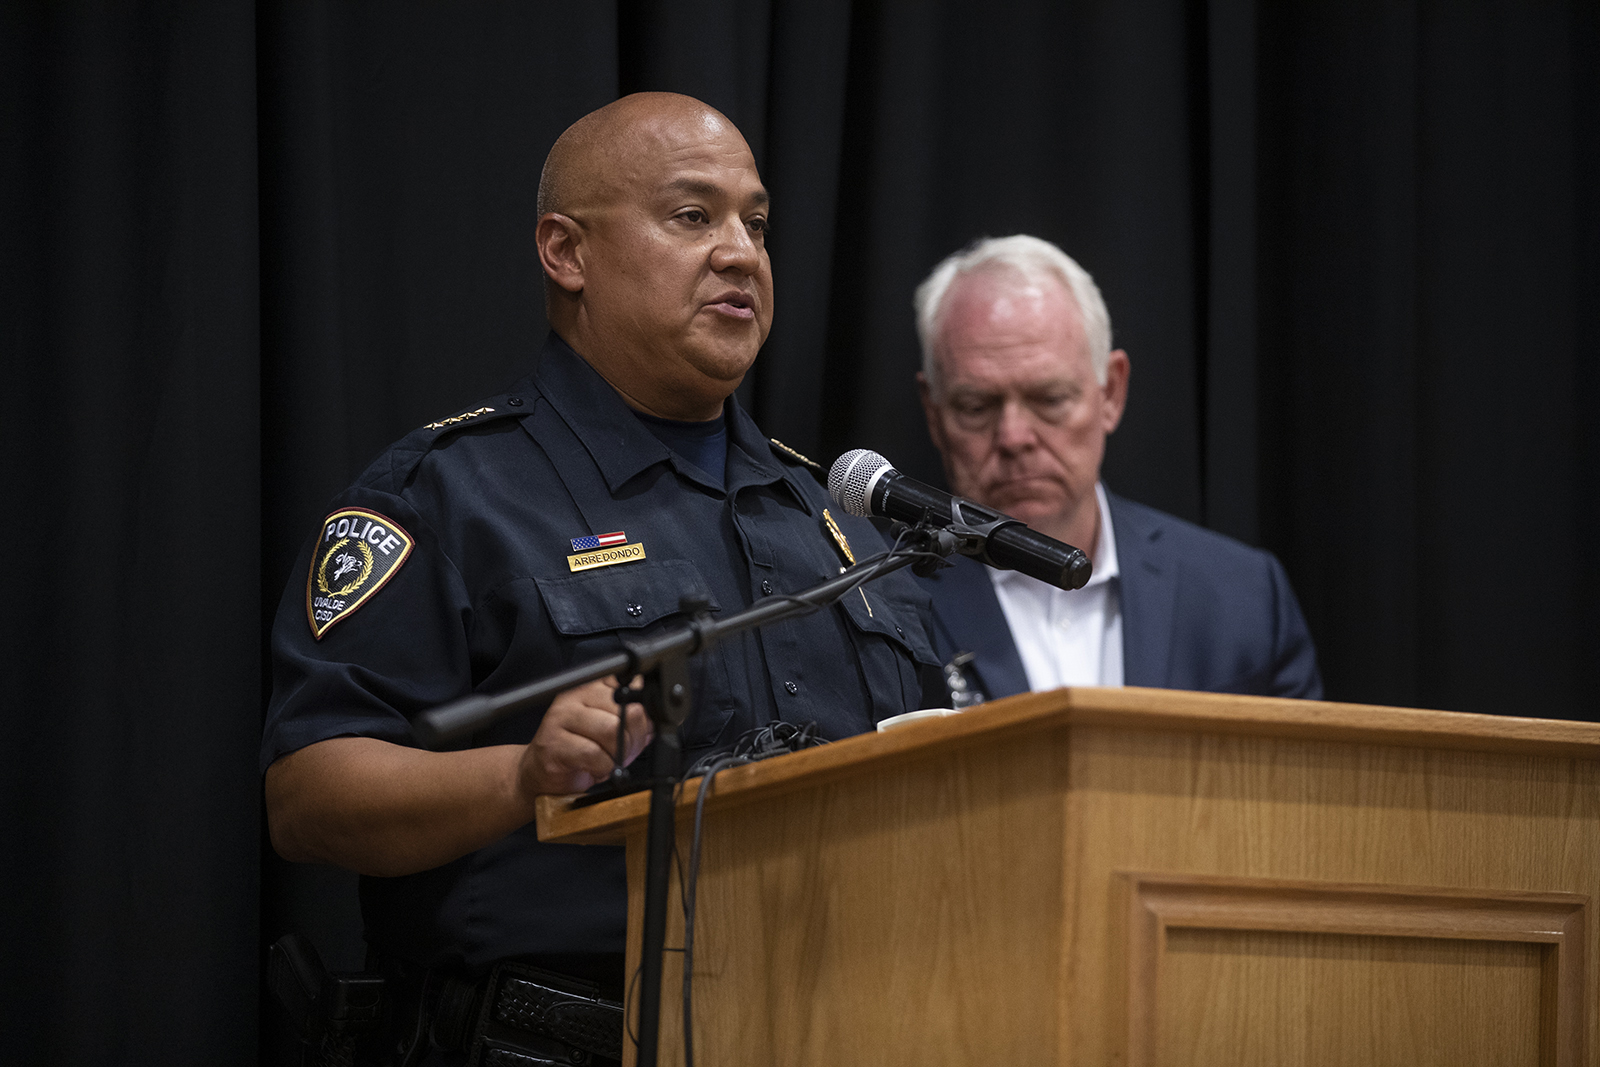 PHOTO: Uvalde police chief Pete Arredondo speaks at a press conference following the shooting at Robb Elementary School in Uvalde, Texas on May 24, 2022.